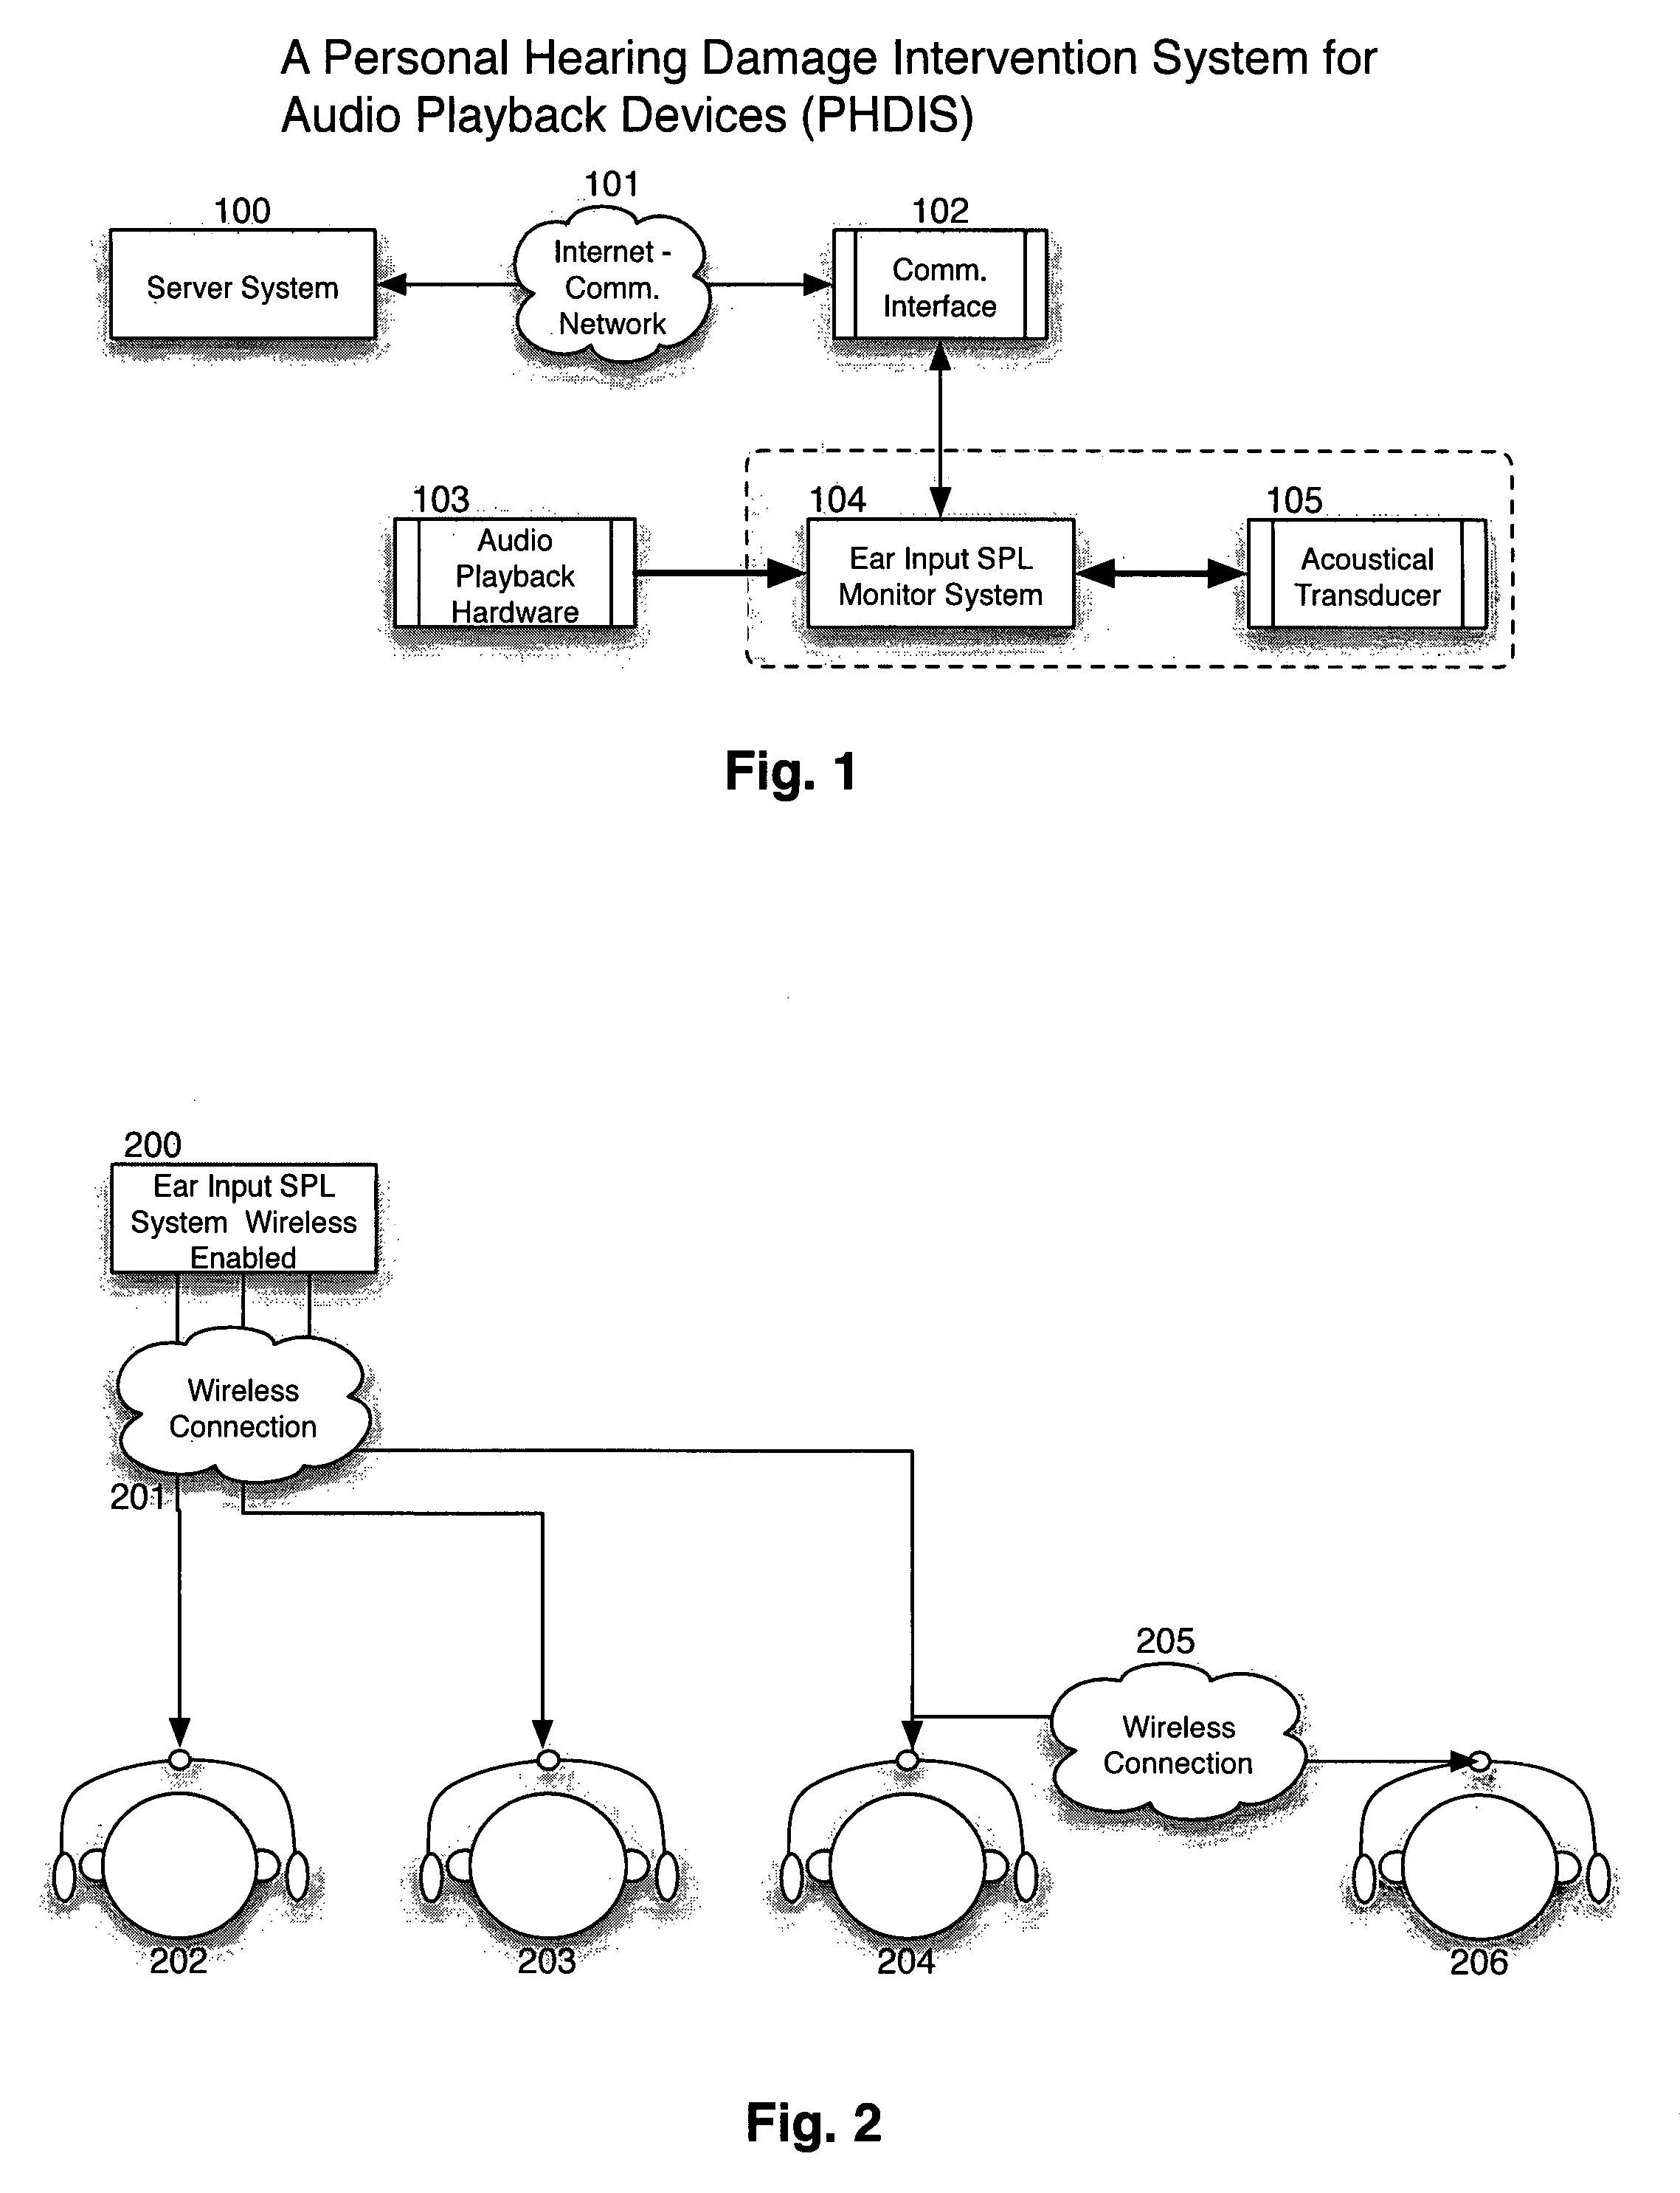 Methods and devices for hearing damage notification and intervention